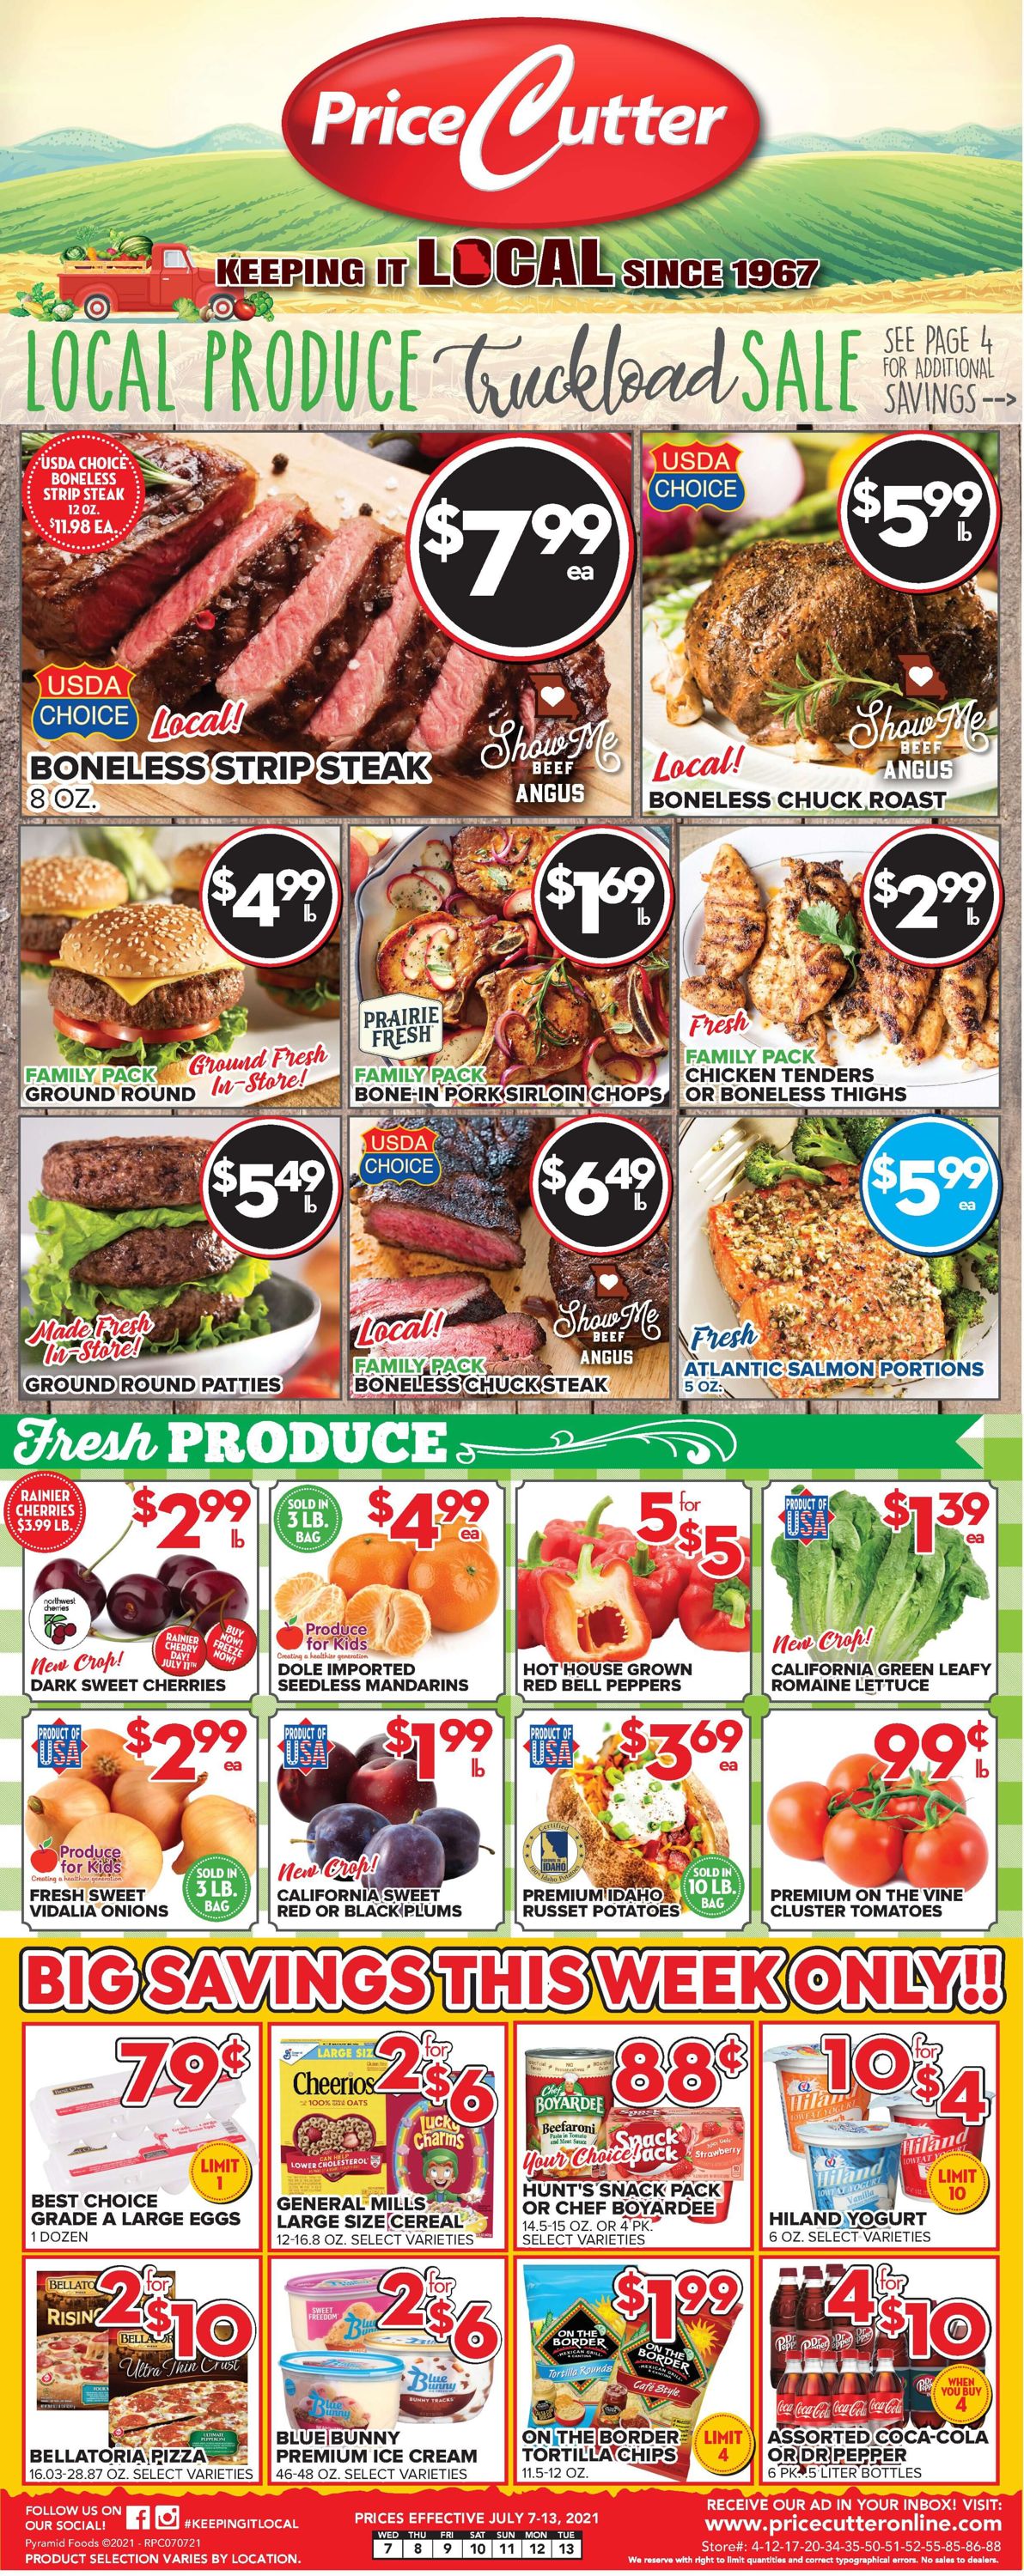 Price Cutter Weekly Ad Circular - valid 07/07-07/13/2021